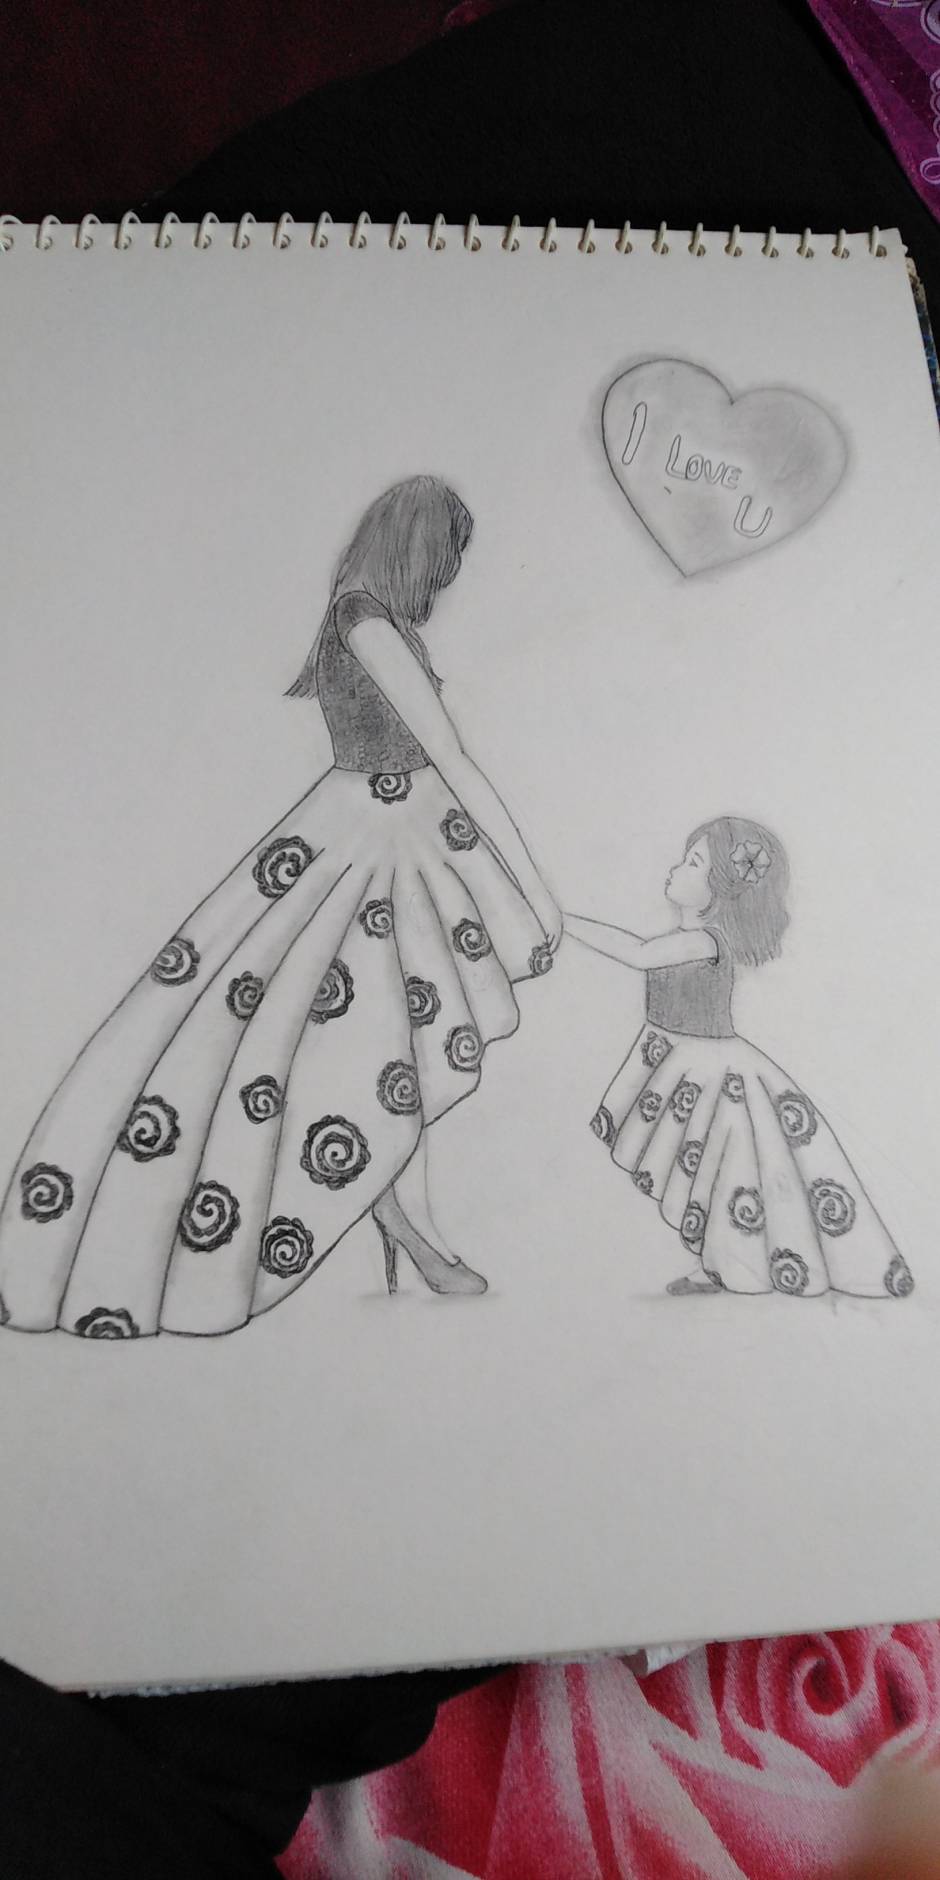 Best Sketches Of Mother And Child By Pencil Step by Step Smile To The  Camera Drawn In 2015 #p… | Pencil drawing images, Art drawings, Art  drawings sketches creative